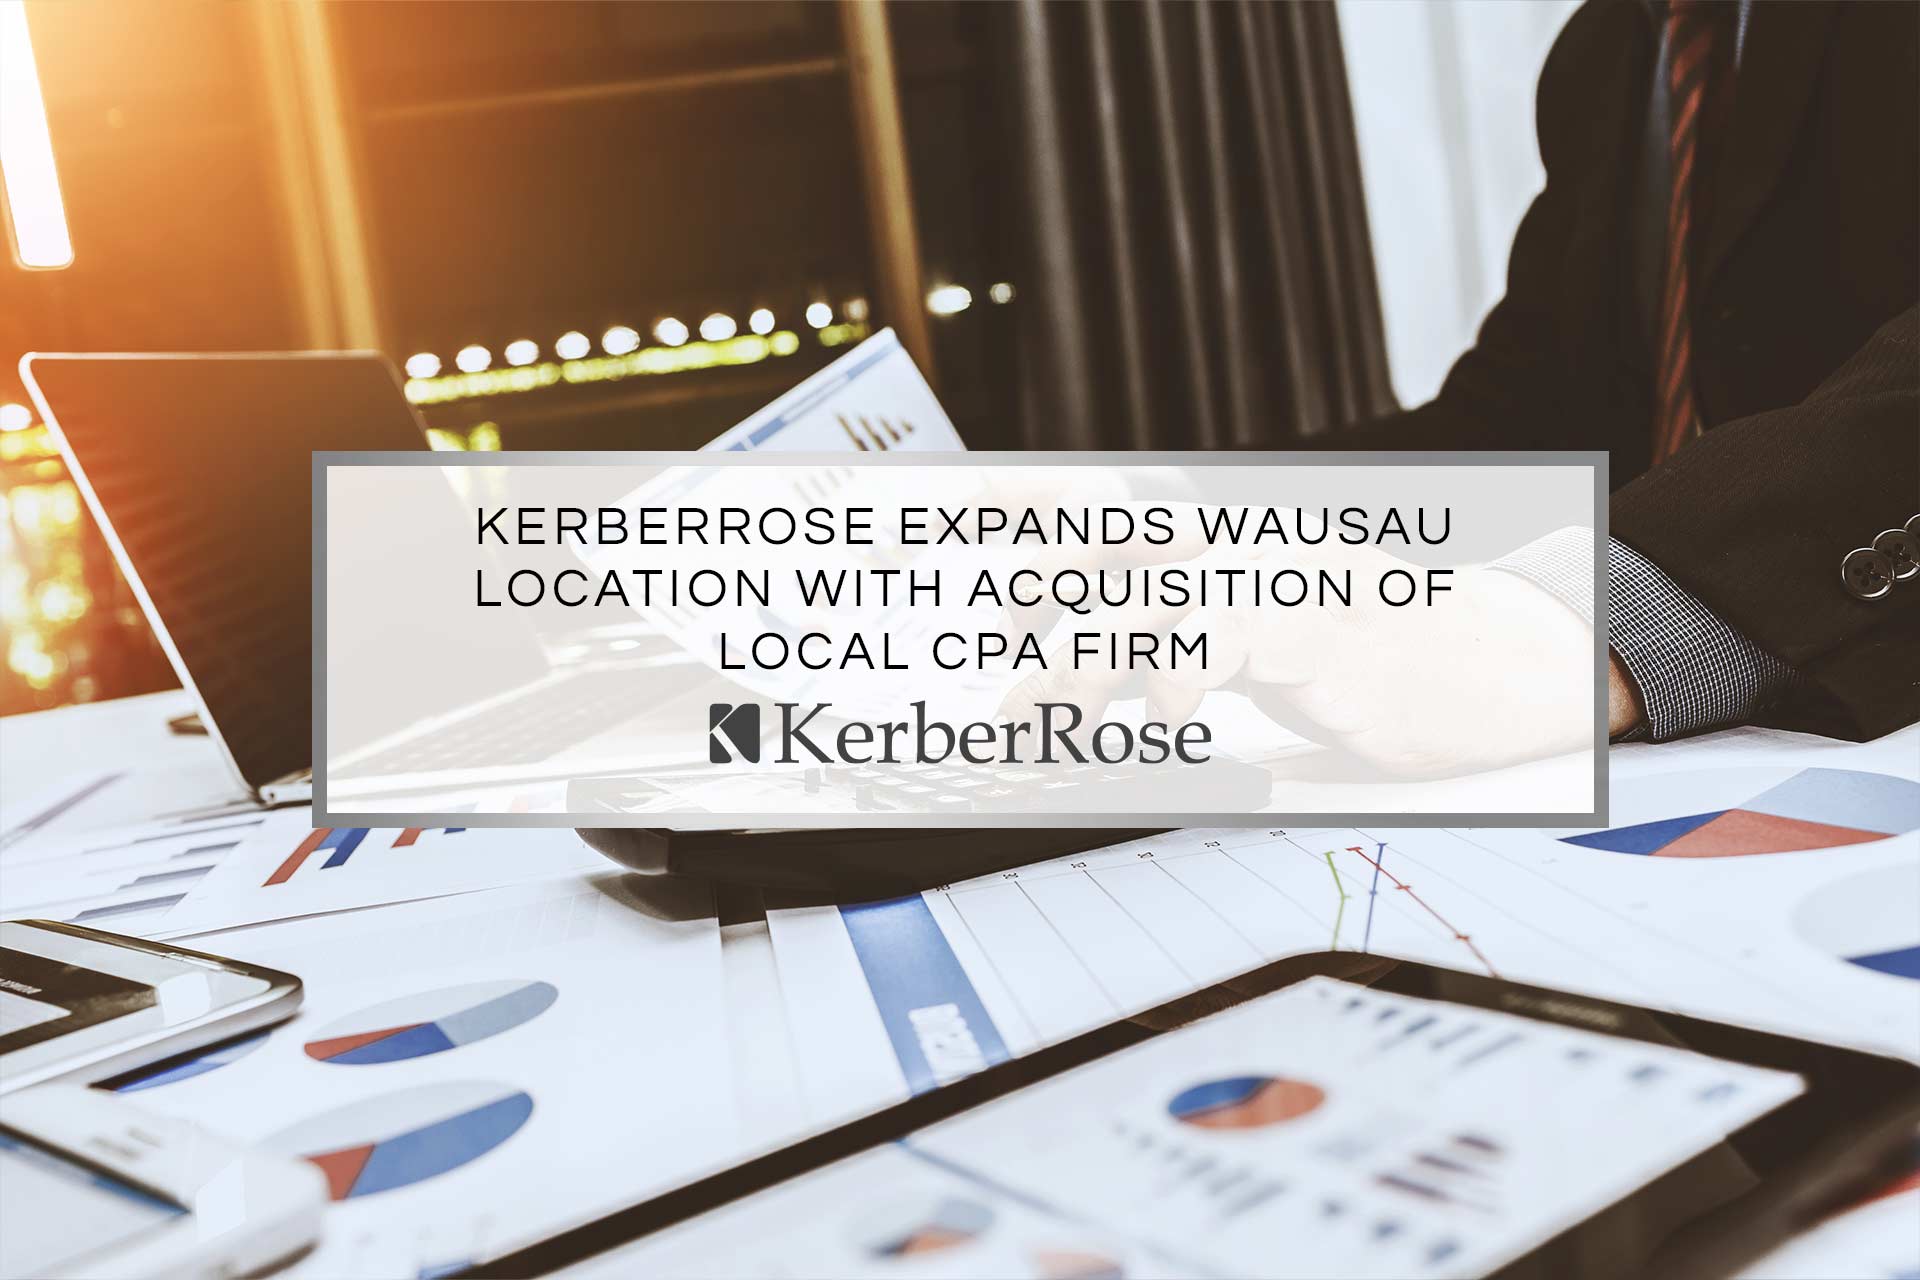 KerberRose Expands Wausau Location with Acquisition of Local CPA Firm